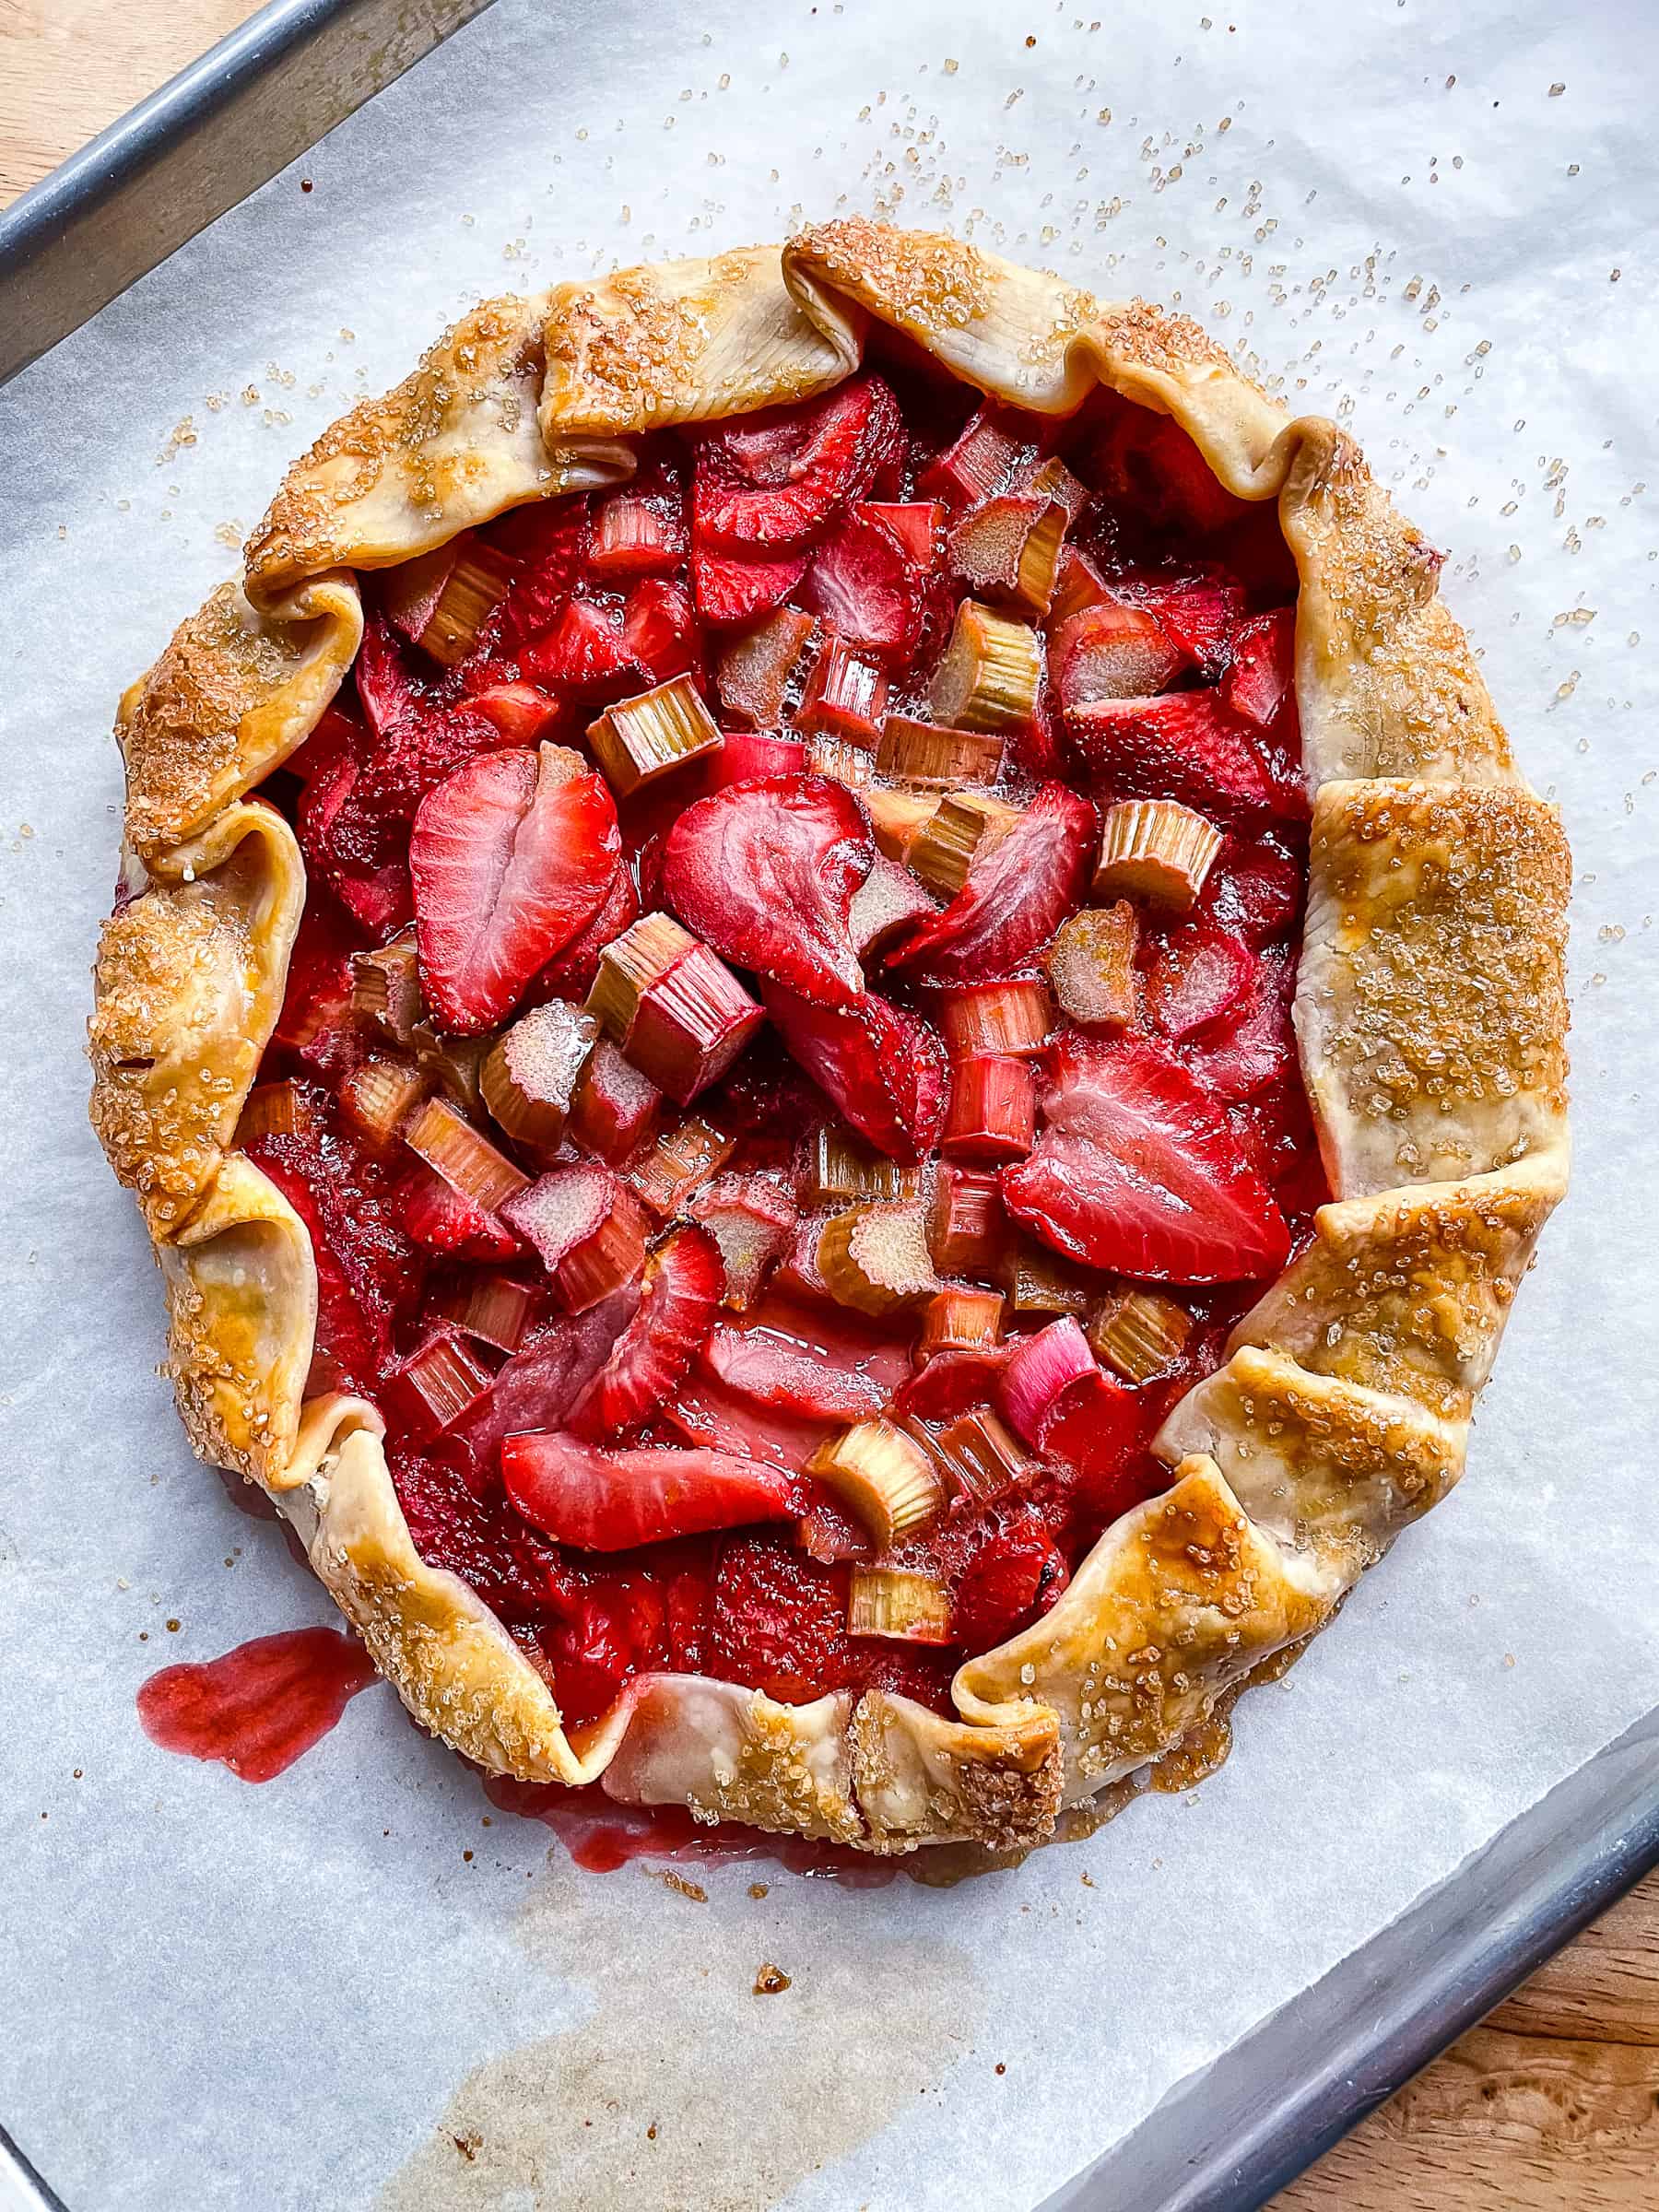 A strawberry-rhubarb galette cooling on a parchment-lined sheet pan.